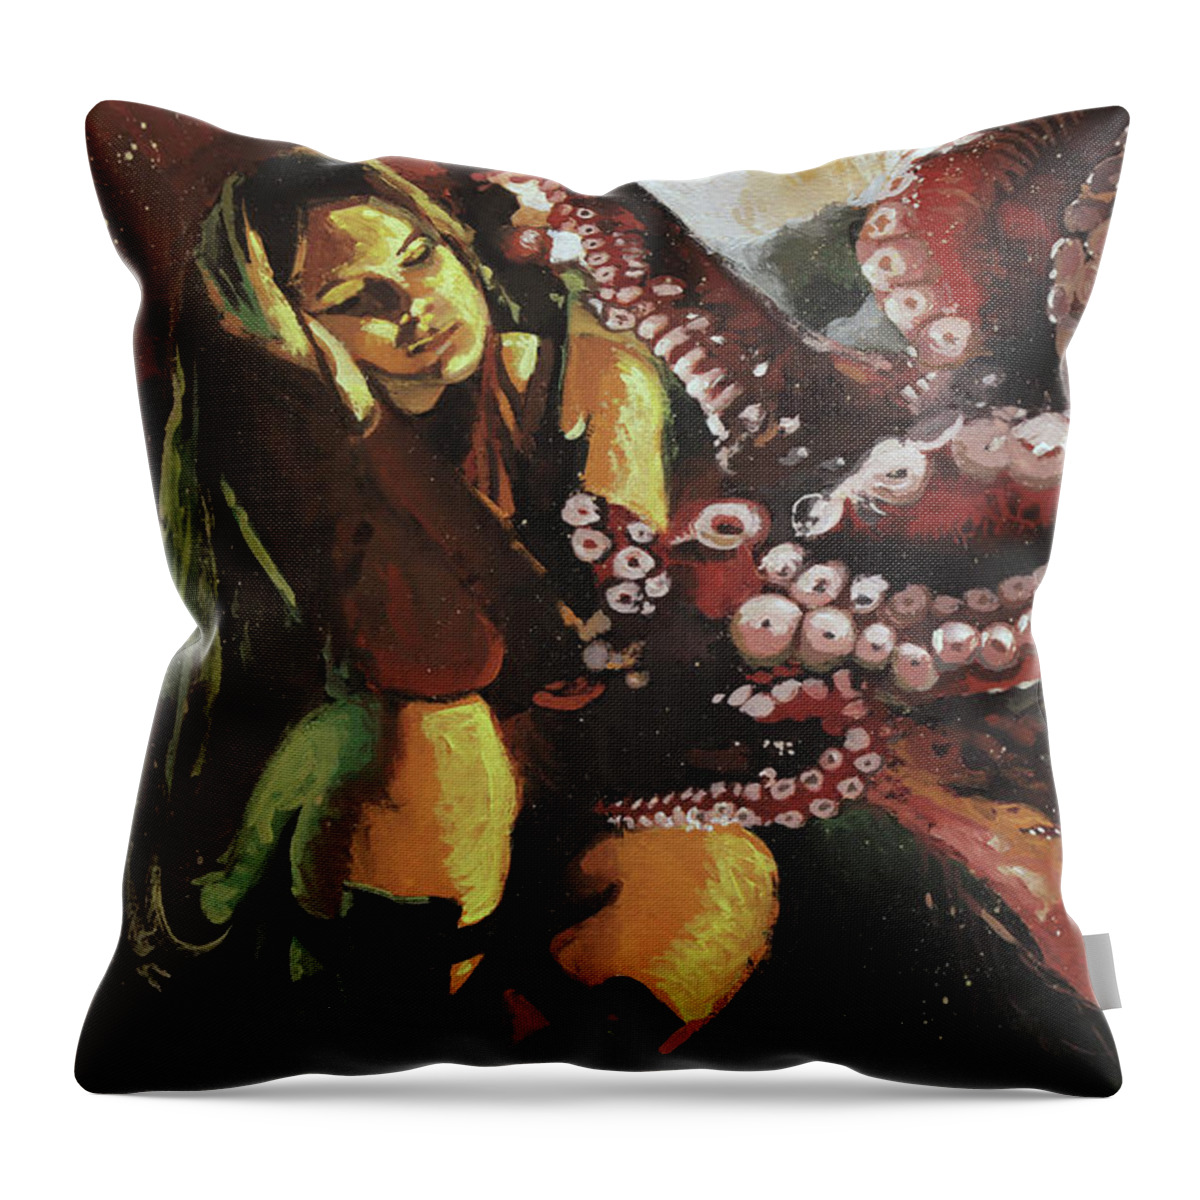 Cthulhu Throw Pillow featuring the painting The Return of the Ancient by Sv Bell